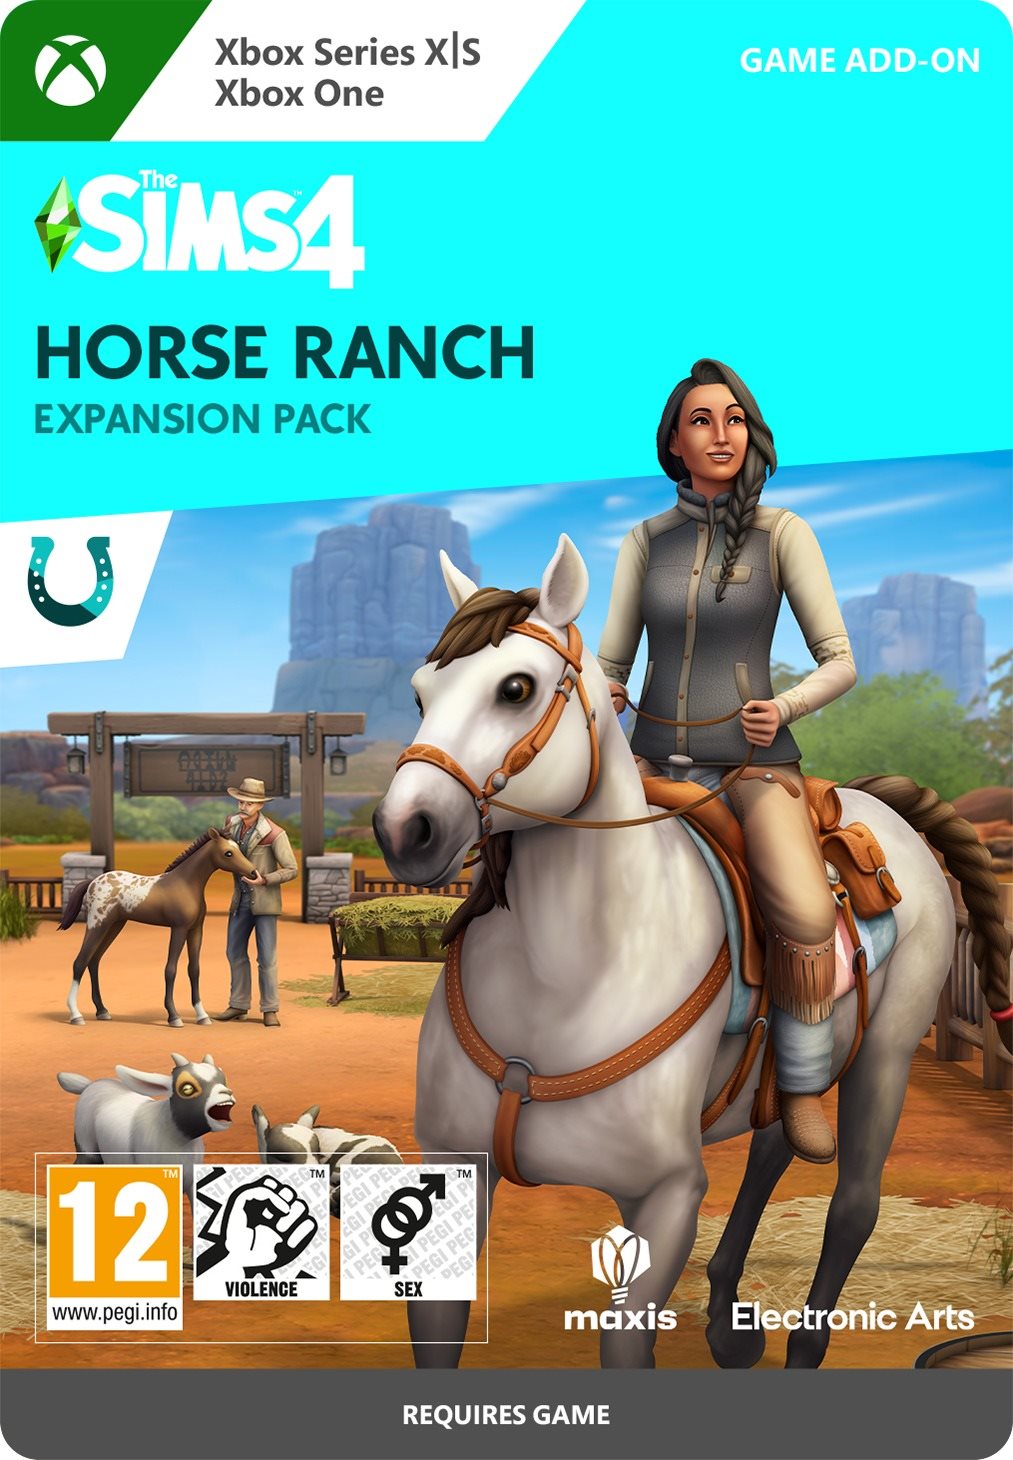 The Sims 4: Horse Ranch Expansion Pack - Xbox Digital